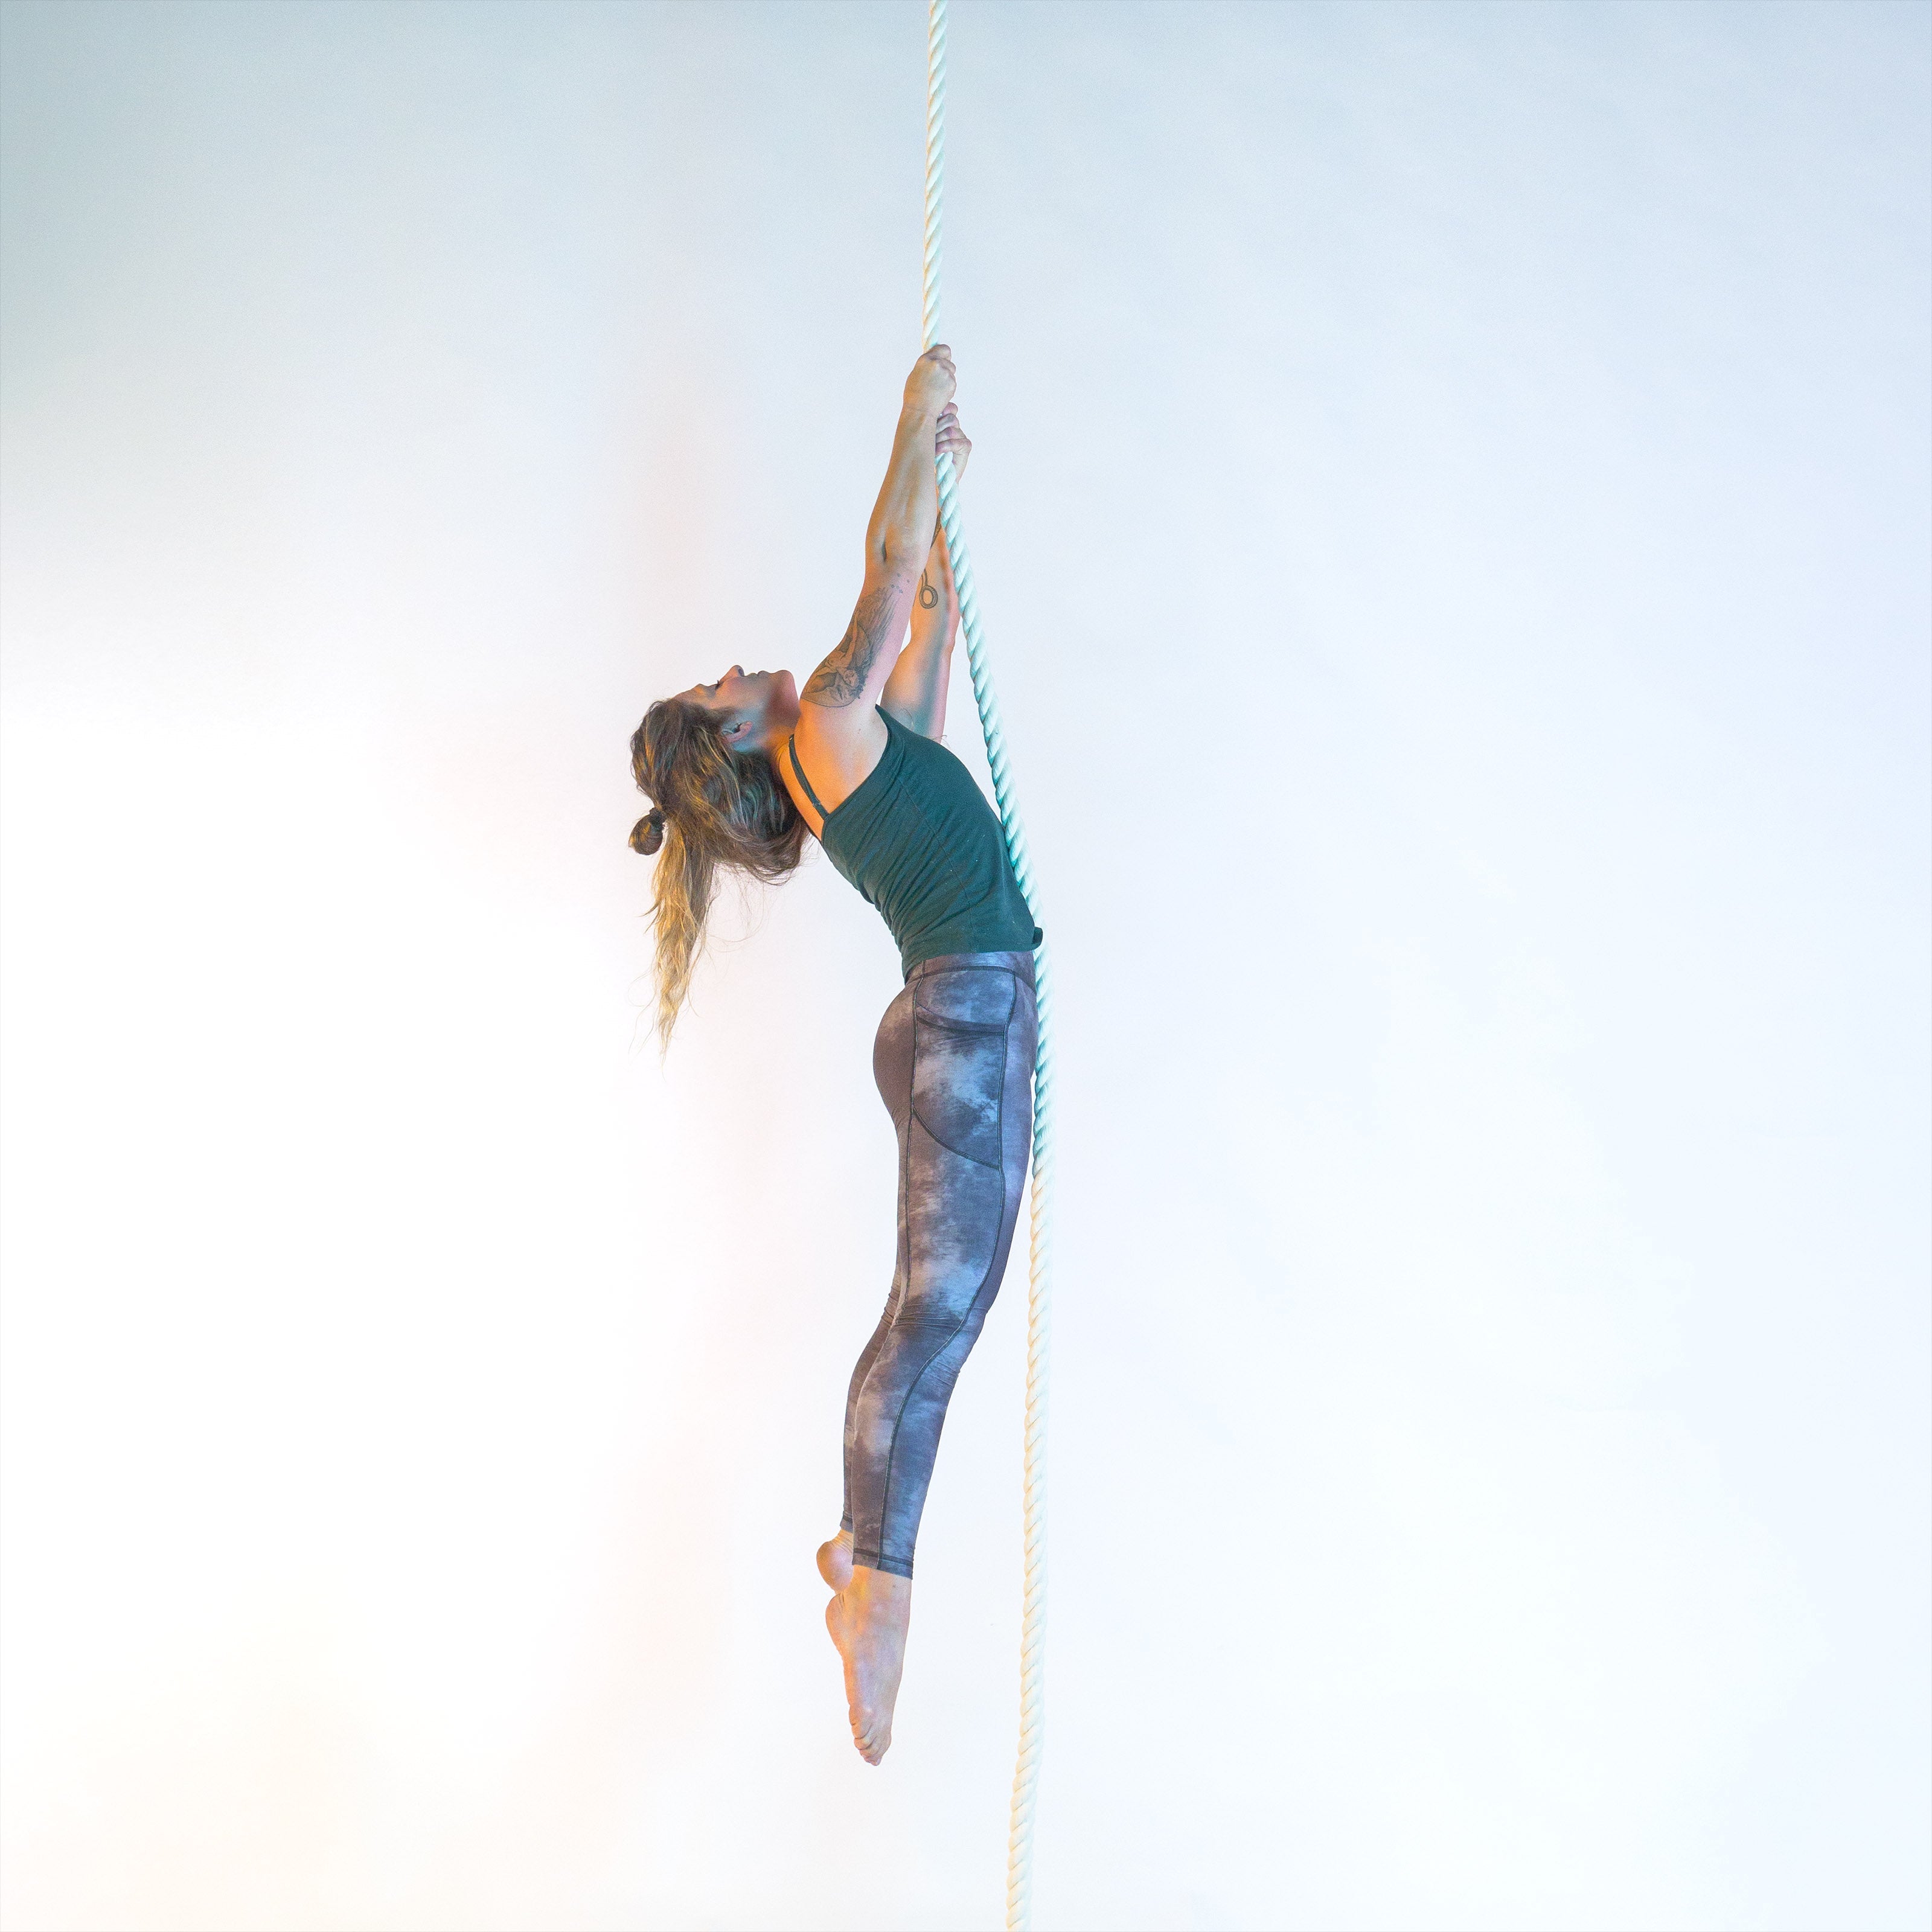 image of a dead-hang being performed on a rope